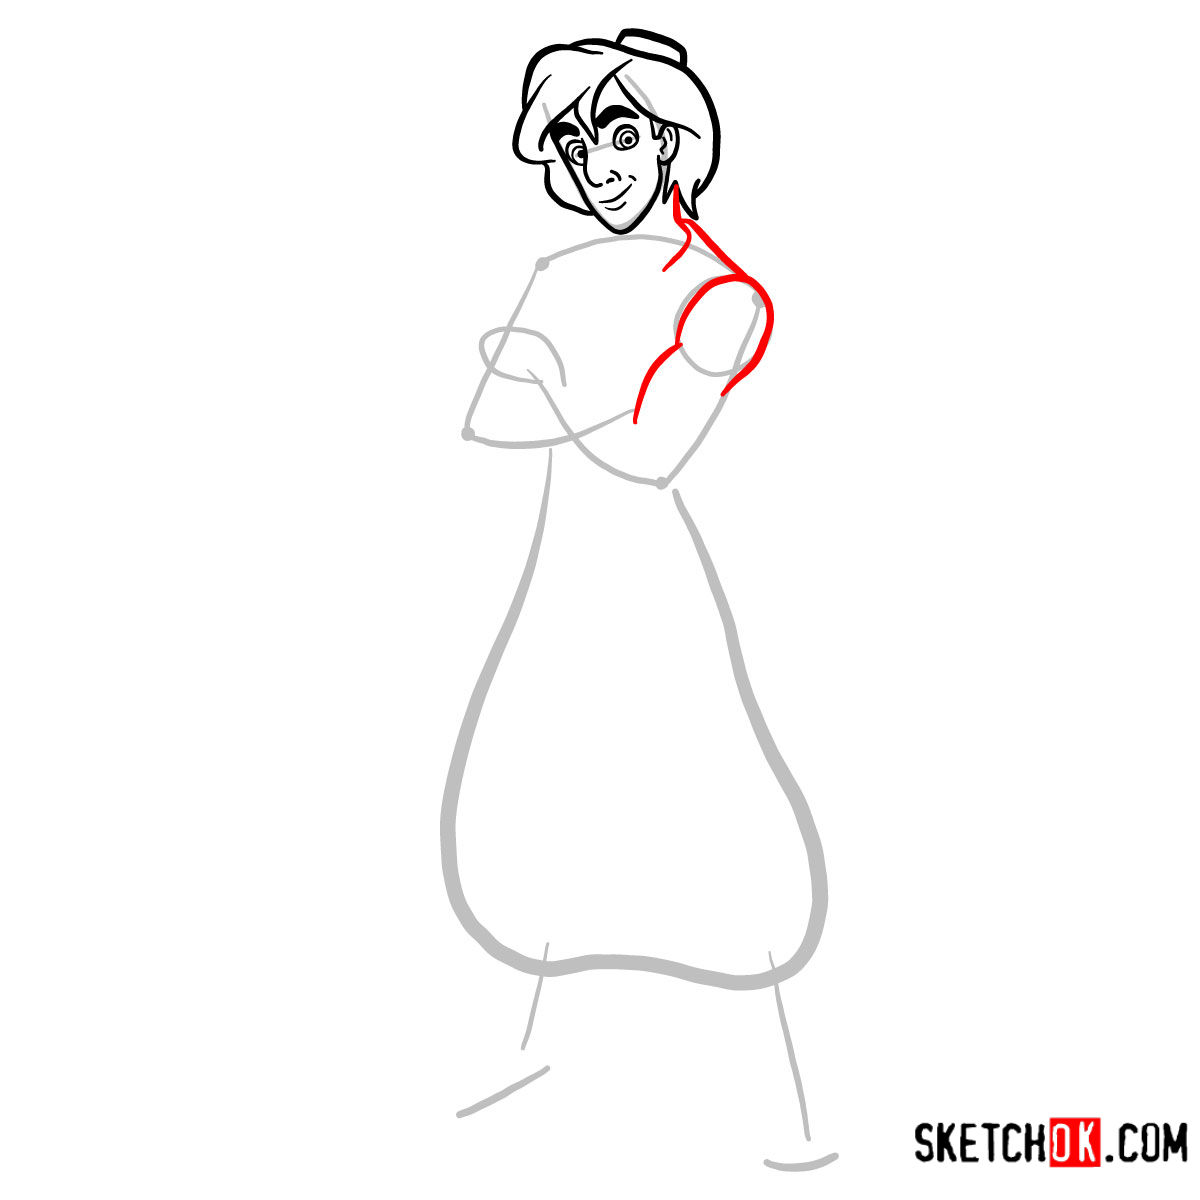 How to draw Aladdin from Disney's animated series - step 05